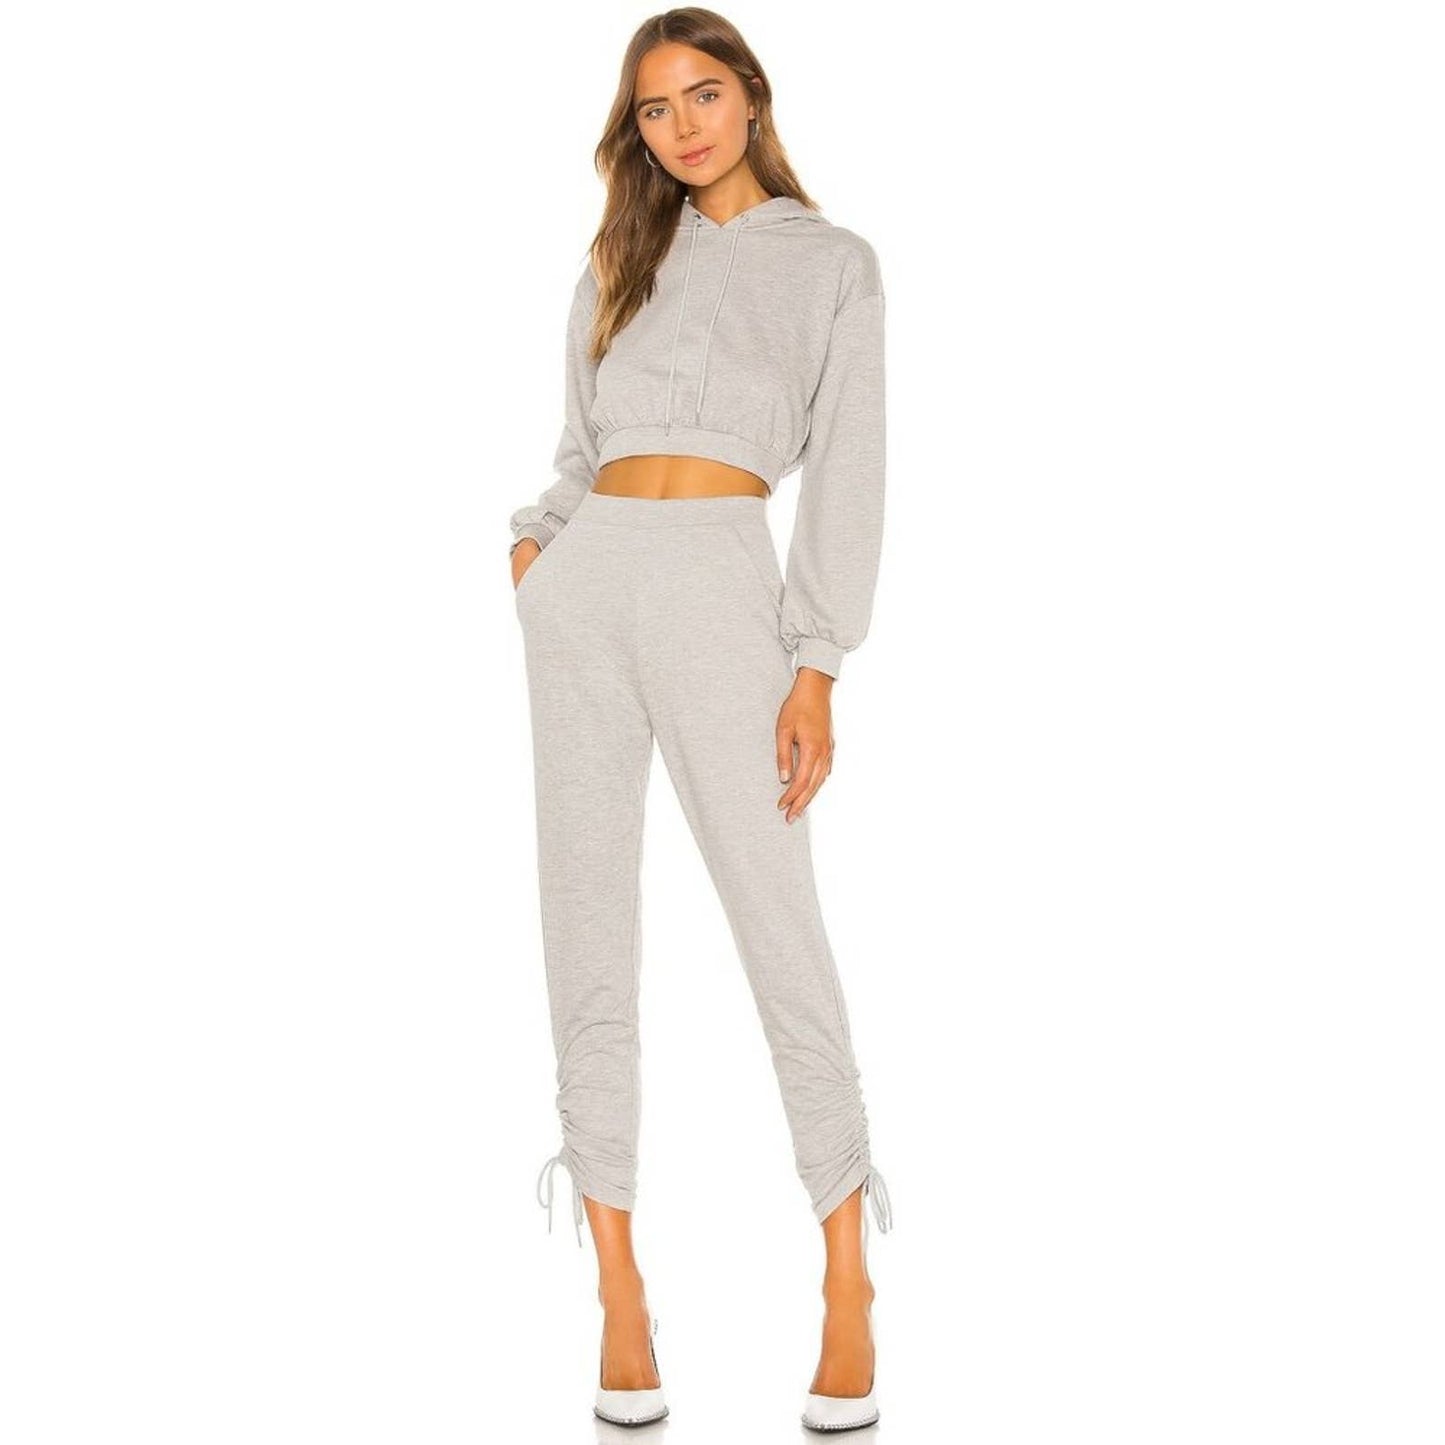 Lovers and Friends Evette Jogger in Heather Gray NWOT Size Small